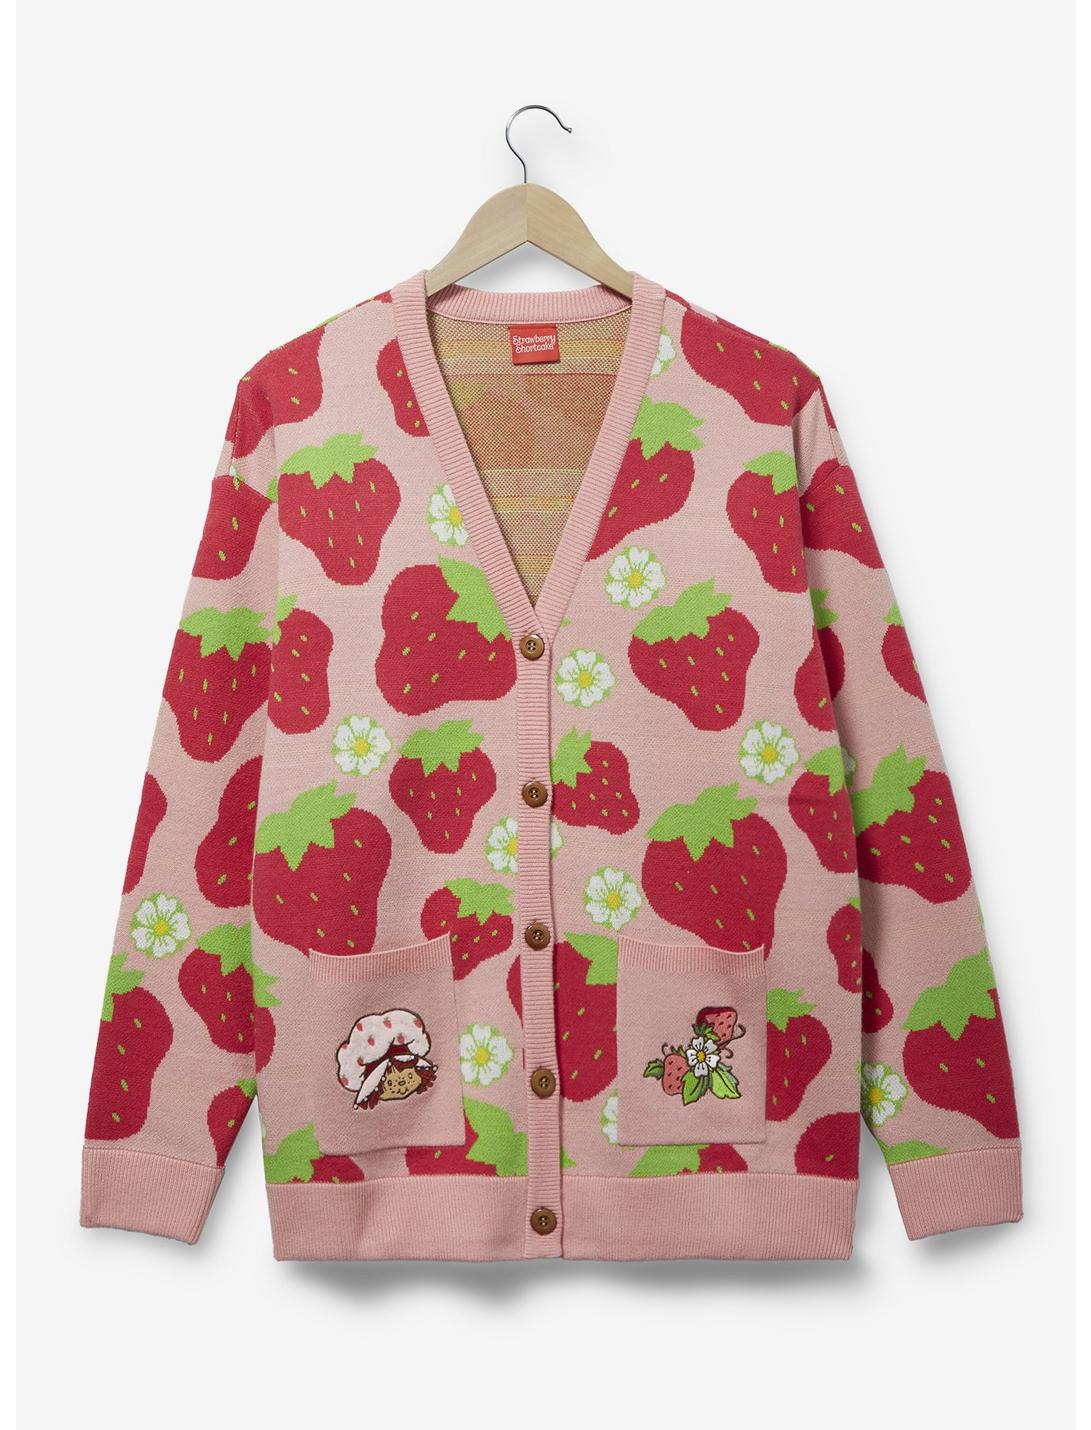 Strawberry Shortcake Allover Strawberry Print Women's Cardigan - BoxLunch Exclusive, LIGHT PINK, hi-res